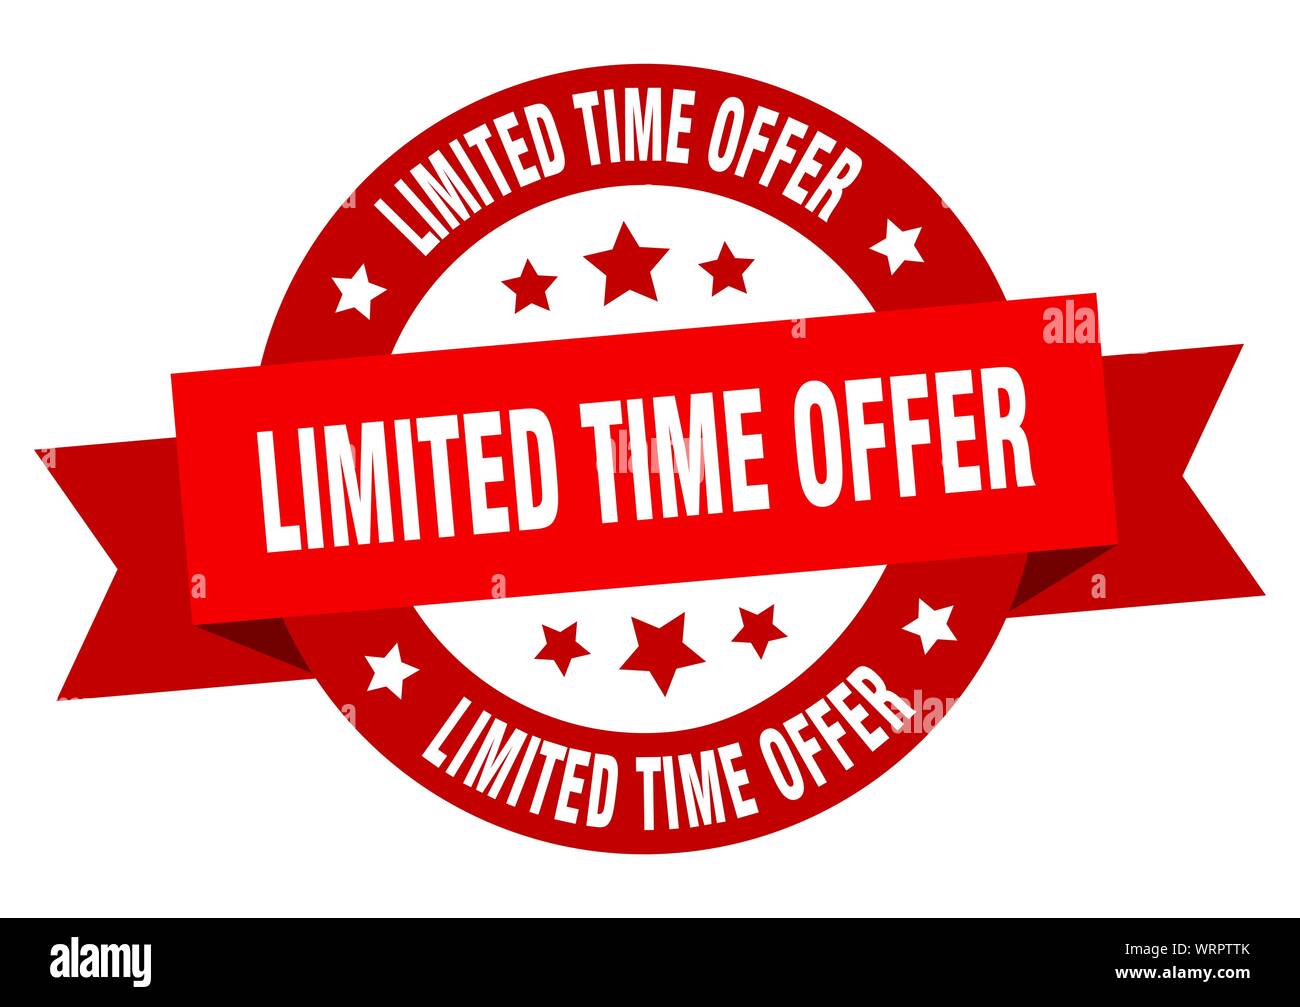 Limited time offers